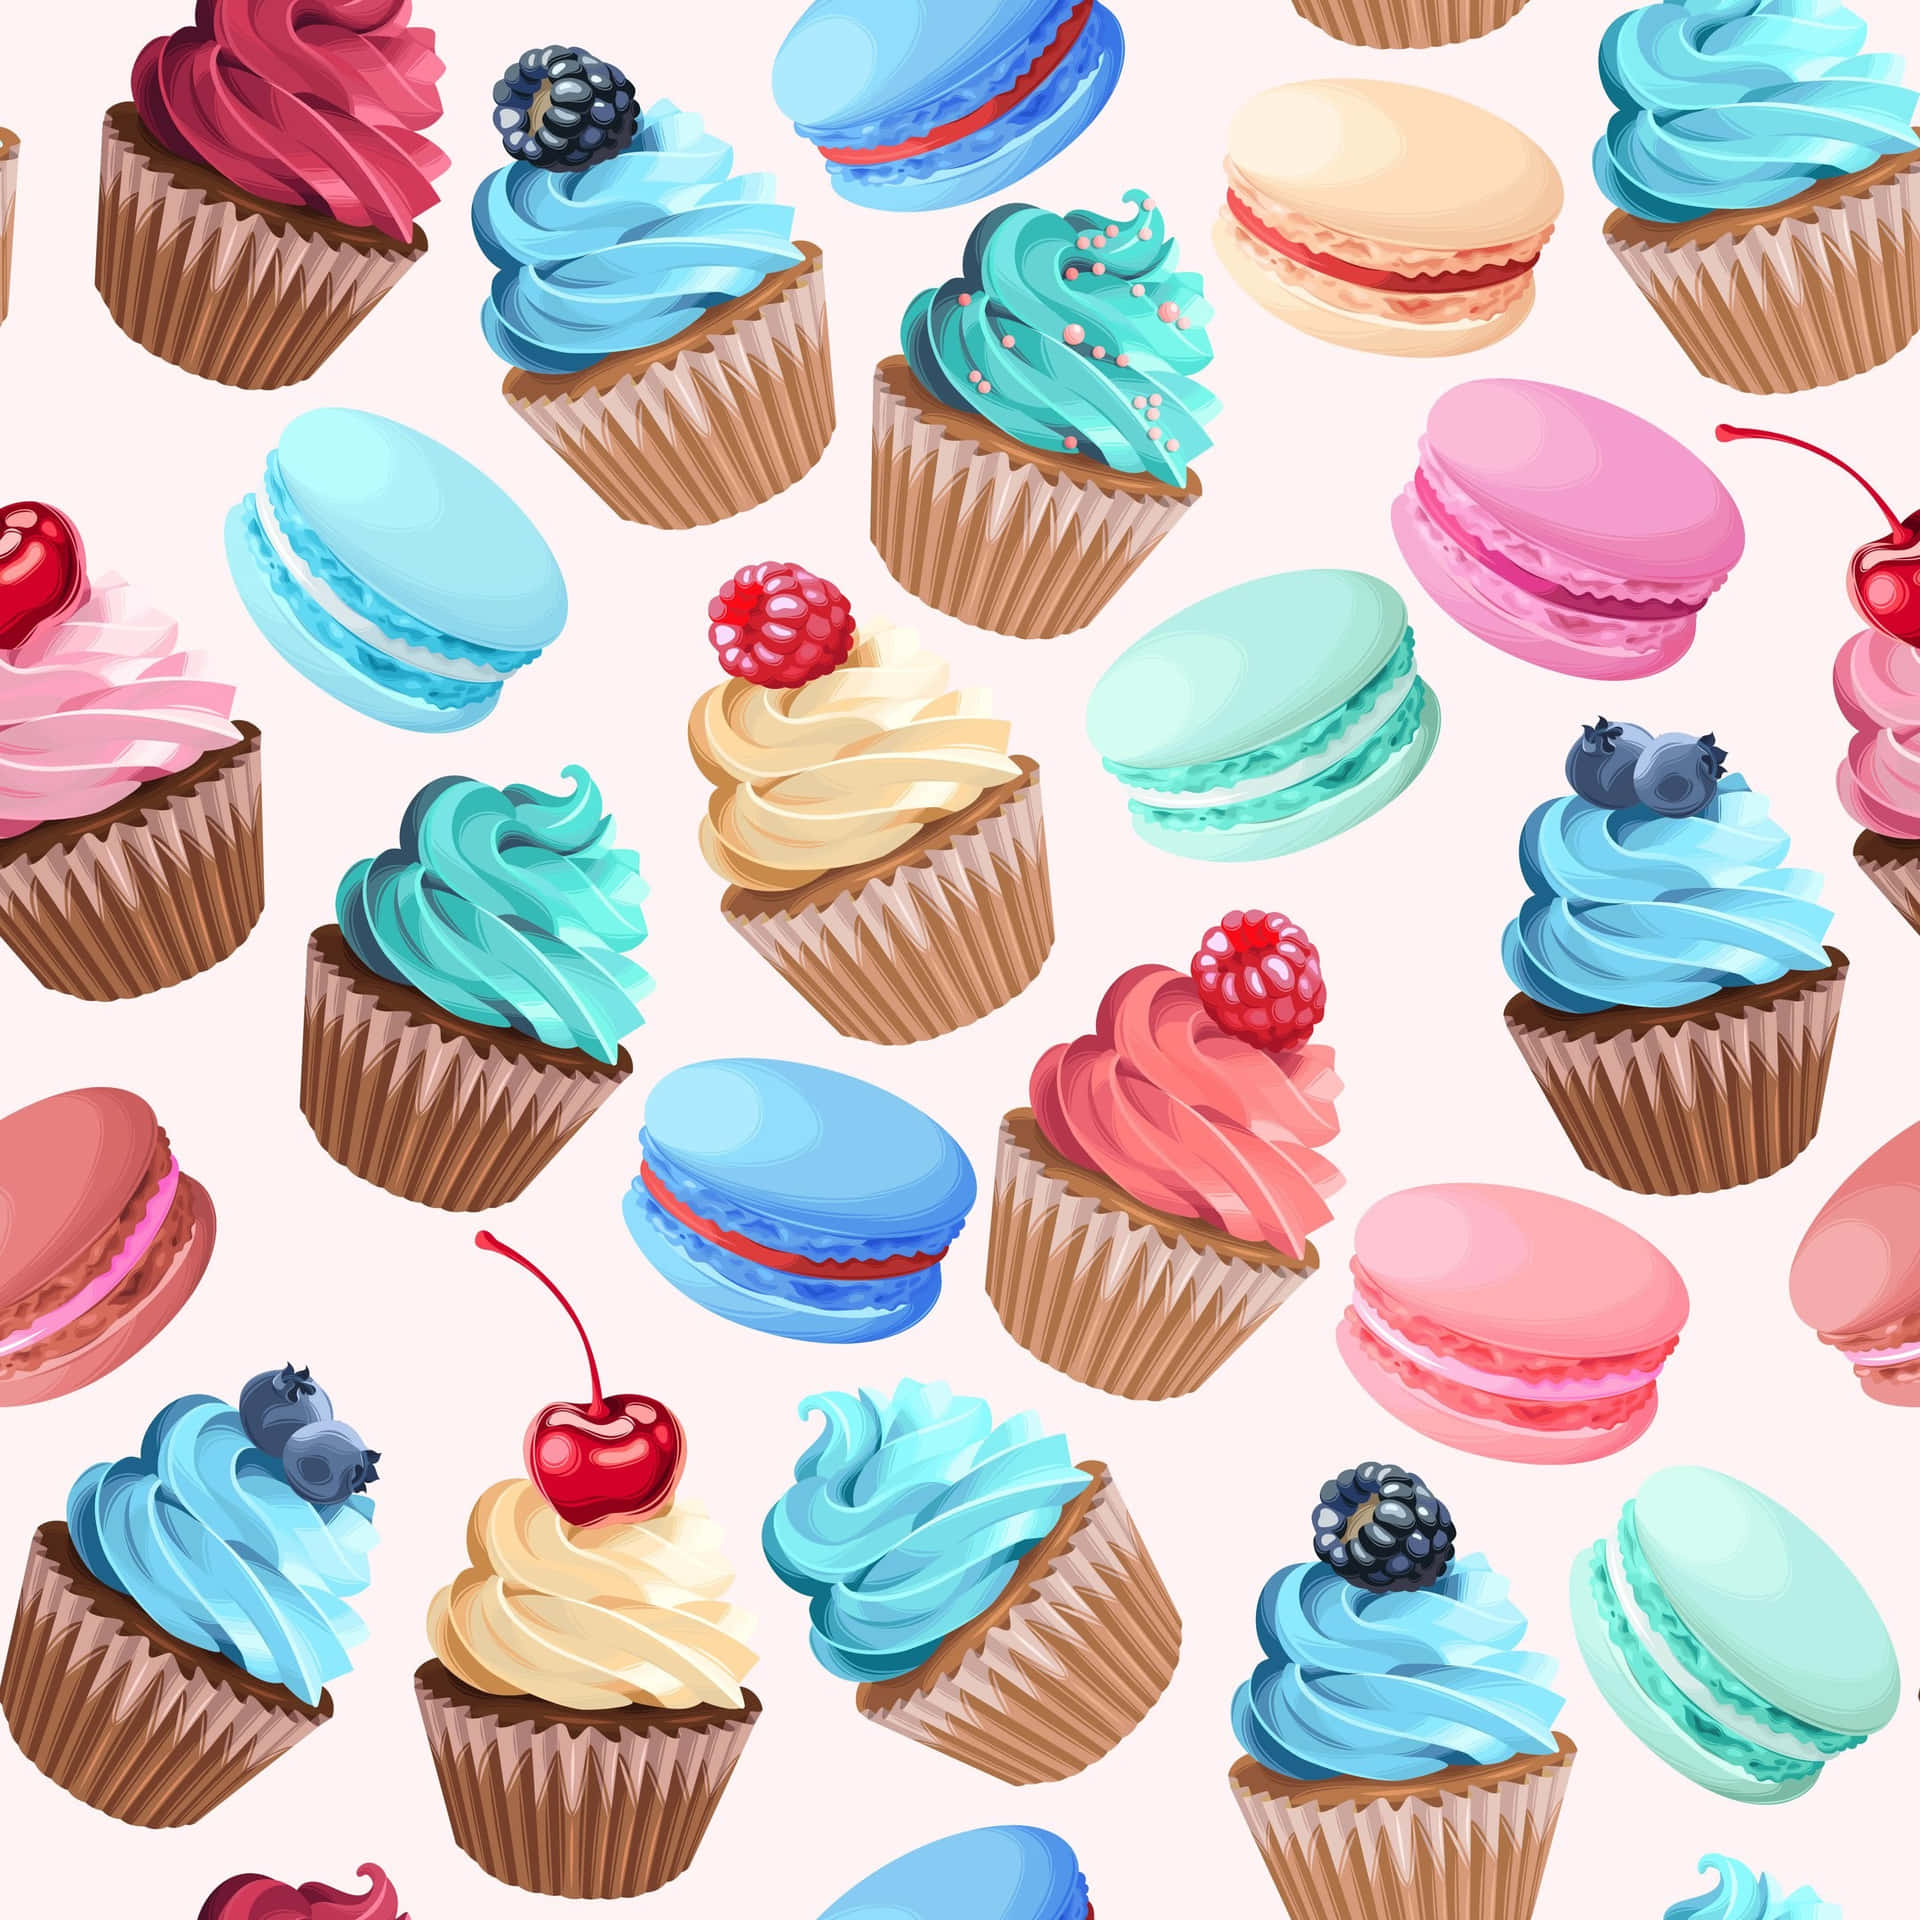 Cute Cupcake with Colorful Sprinkles and Pink Icing Wallpaper